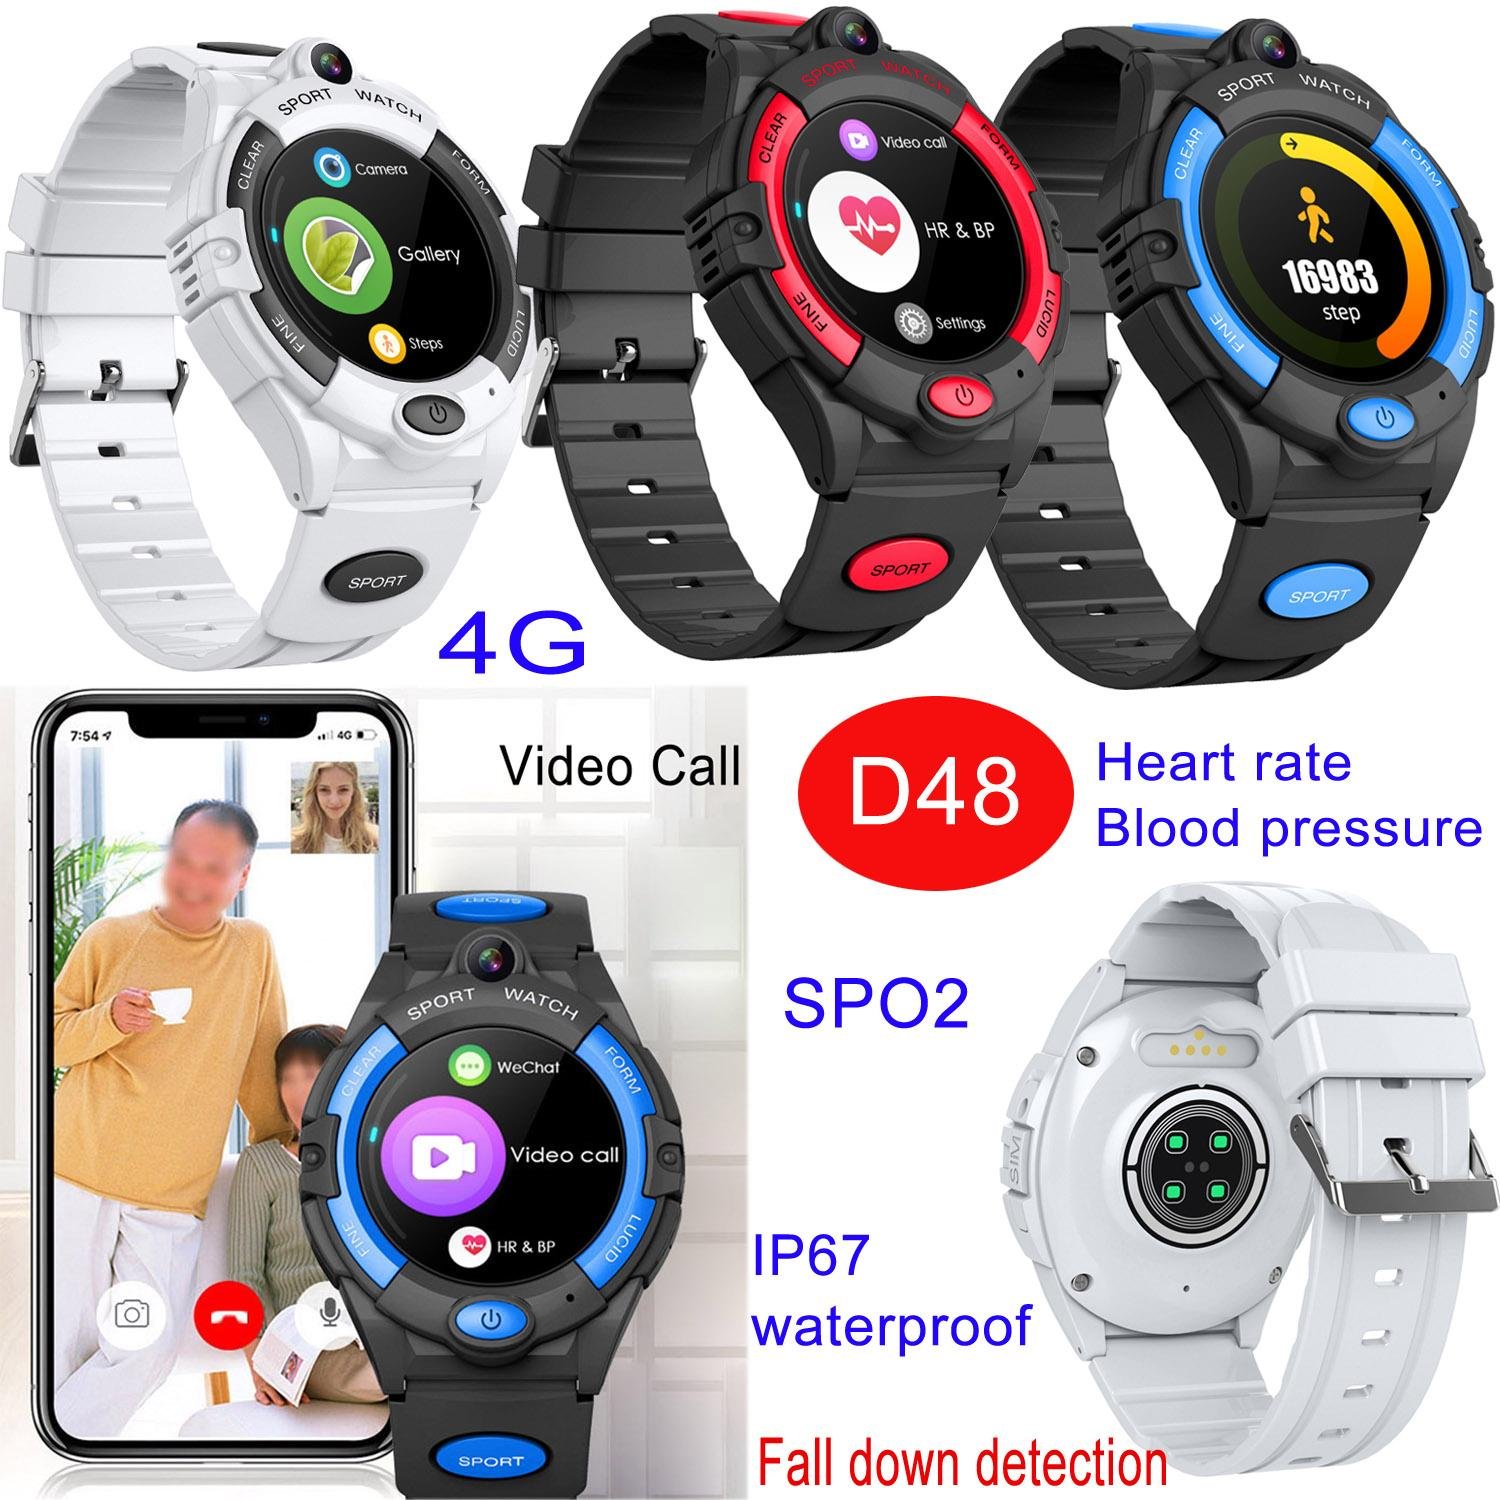 4G Round Screen Senior Healthcare GPS Watch Tracker with Fall Down Detetion D48 1